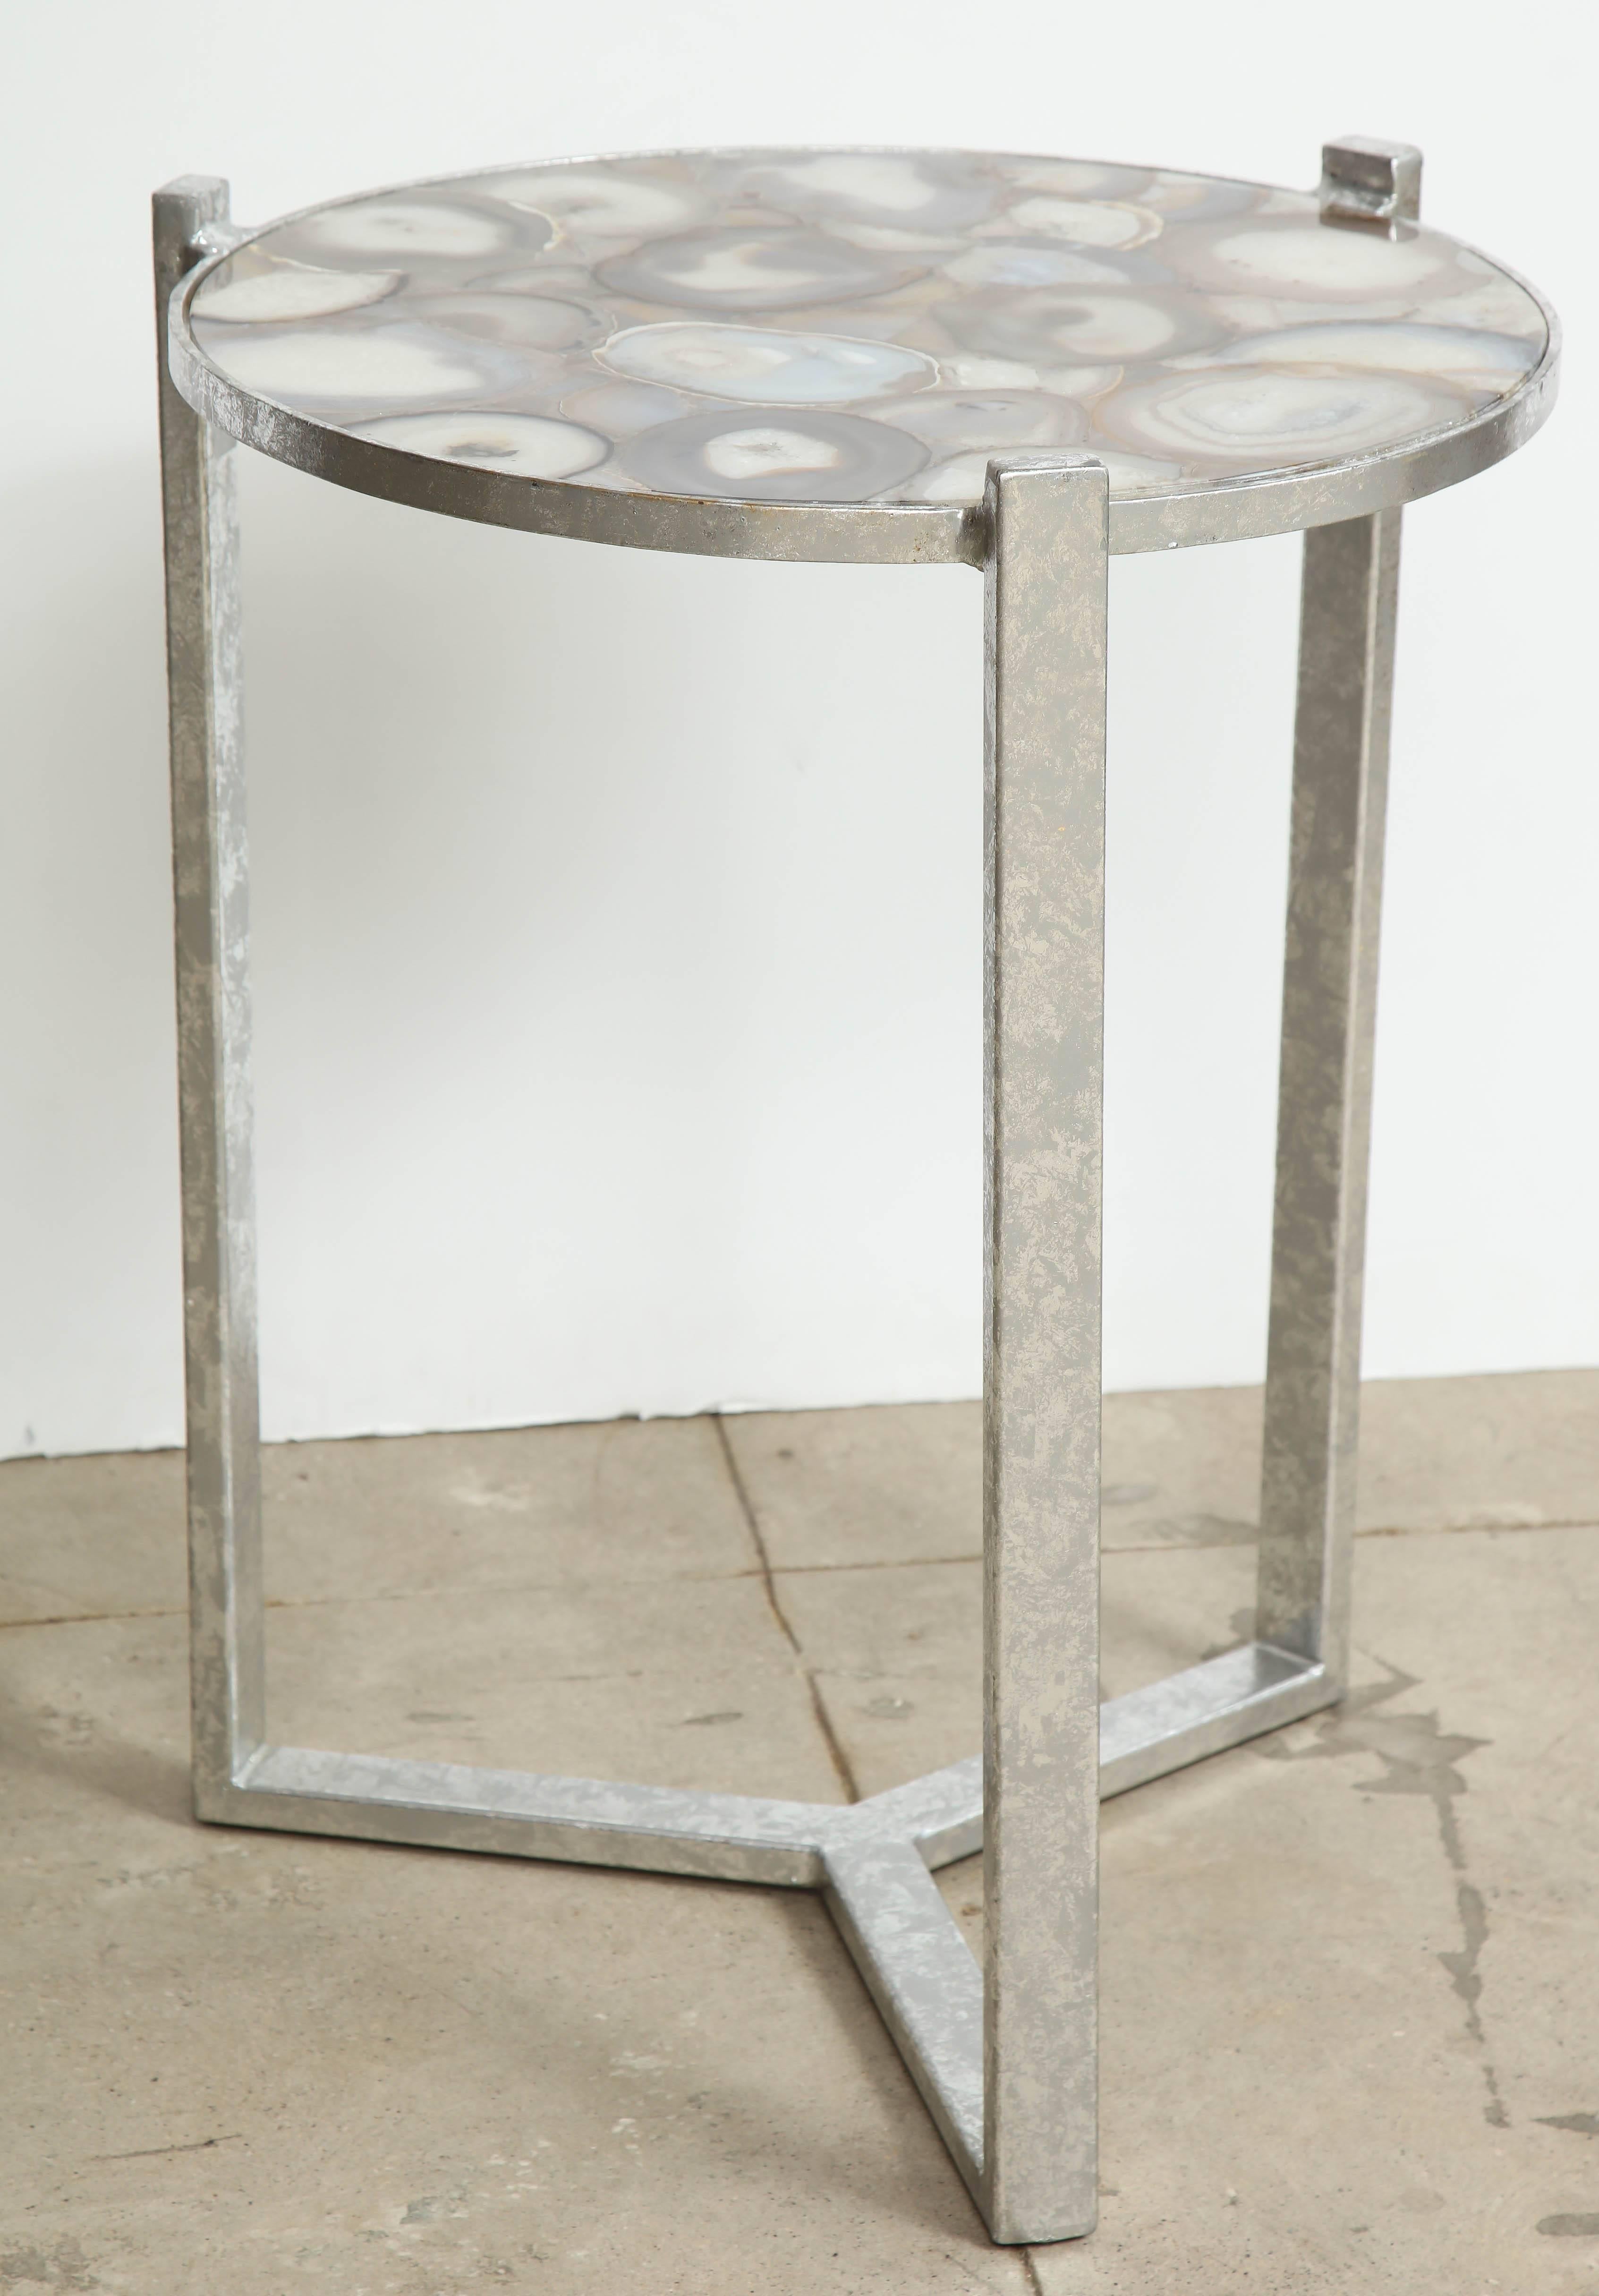 Contemporary silvered iron side table with sliced agate geode slices in colors of taupe, cream and browns suspended in clear resin. 